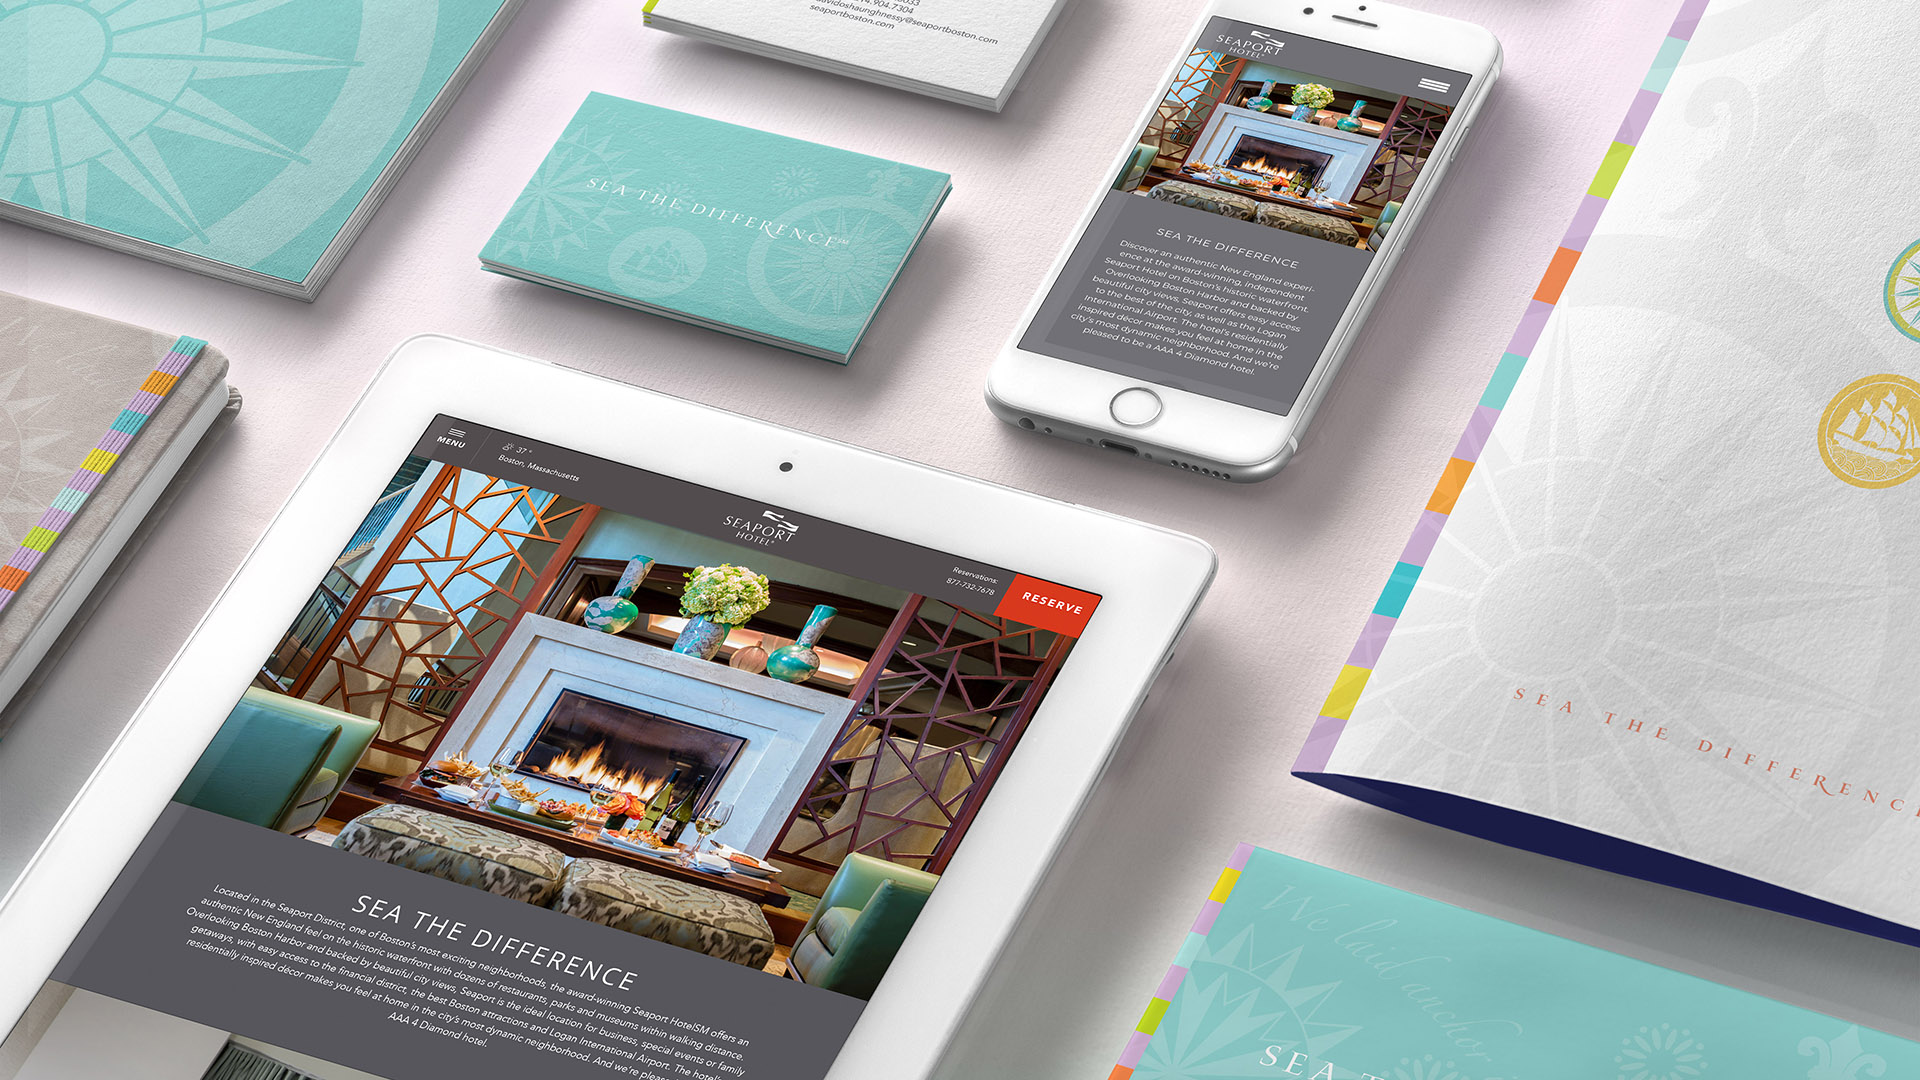 seaport hotel branding with ipad and folder